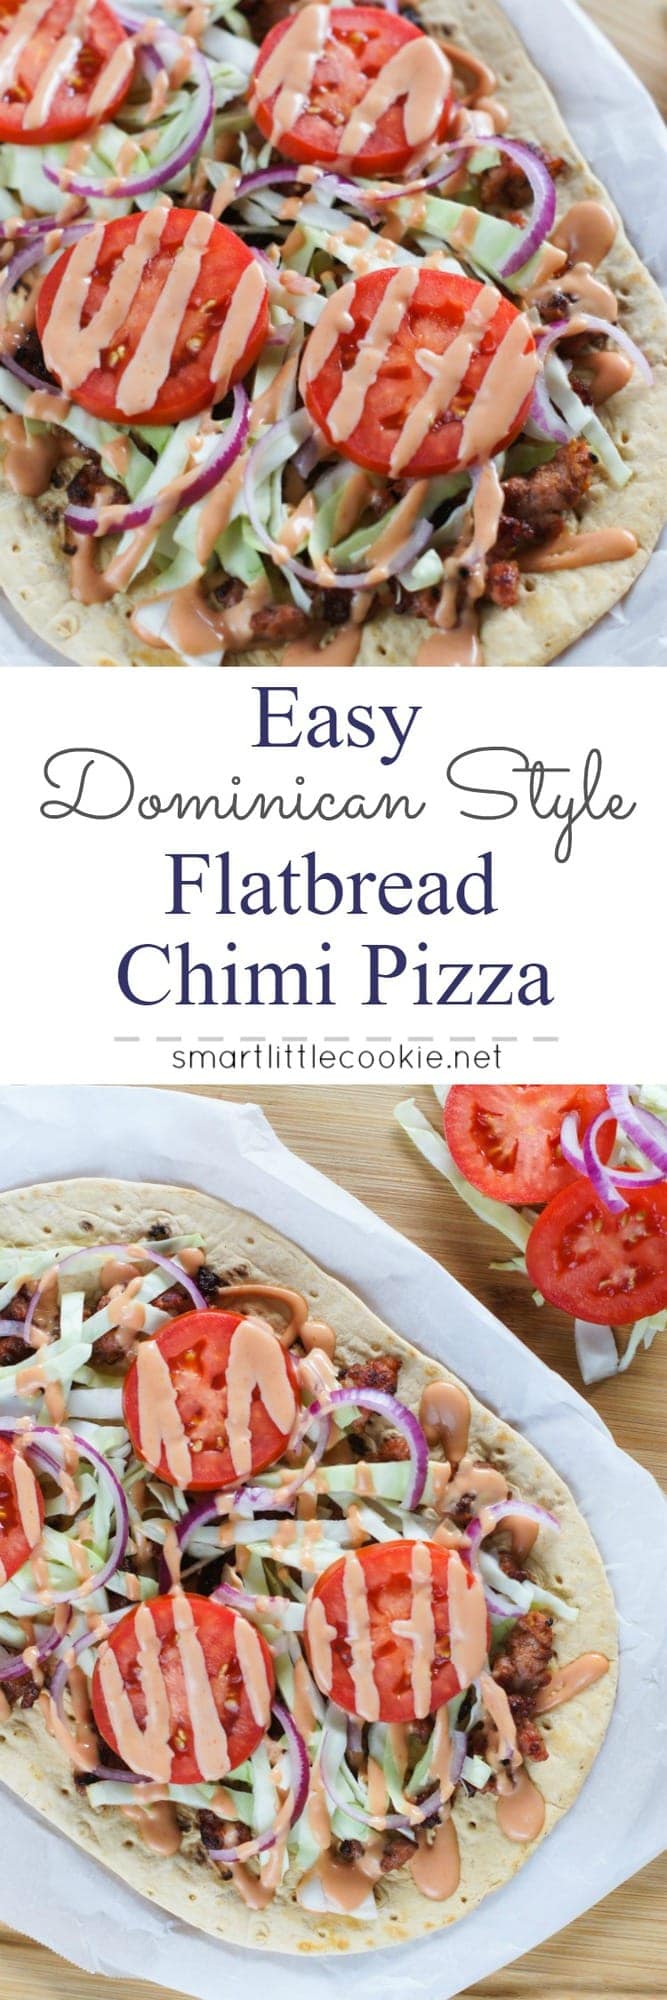 Pinterest graphic. Flatbread chimi pizza with text overlay.